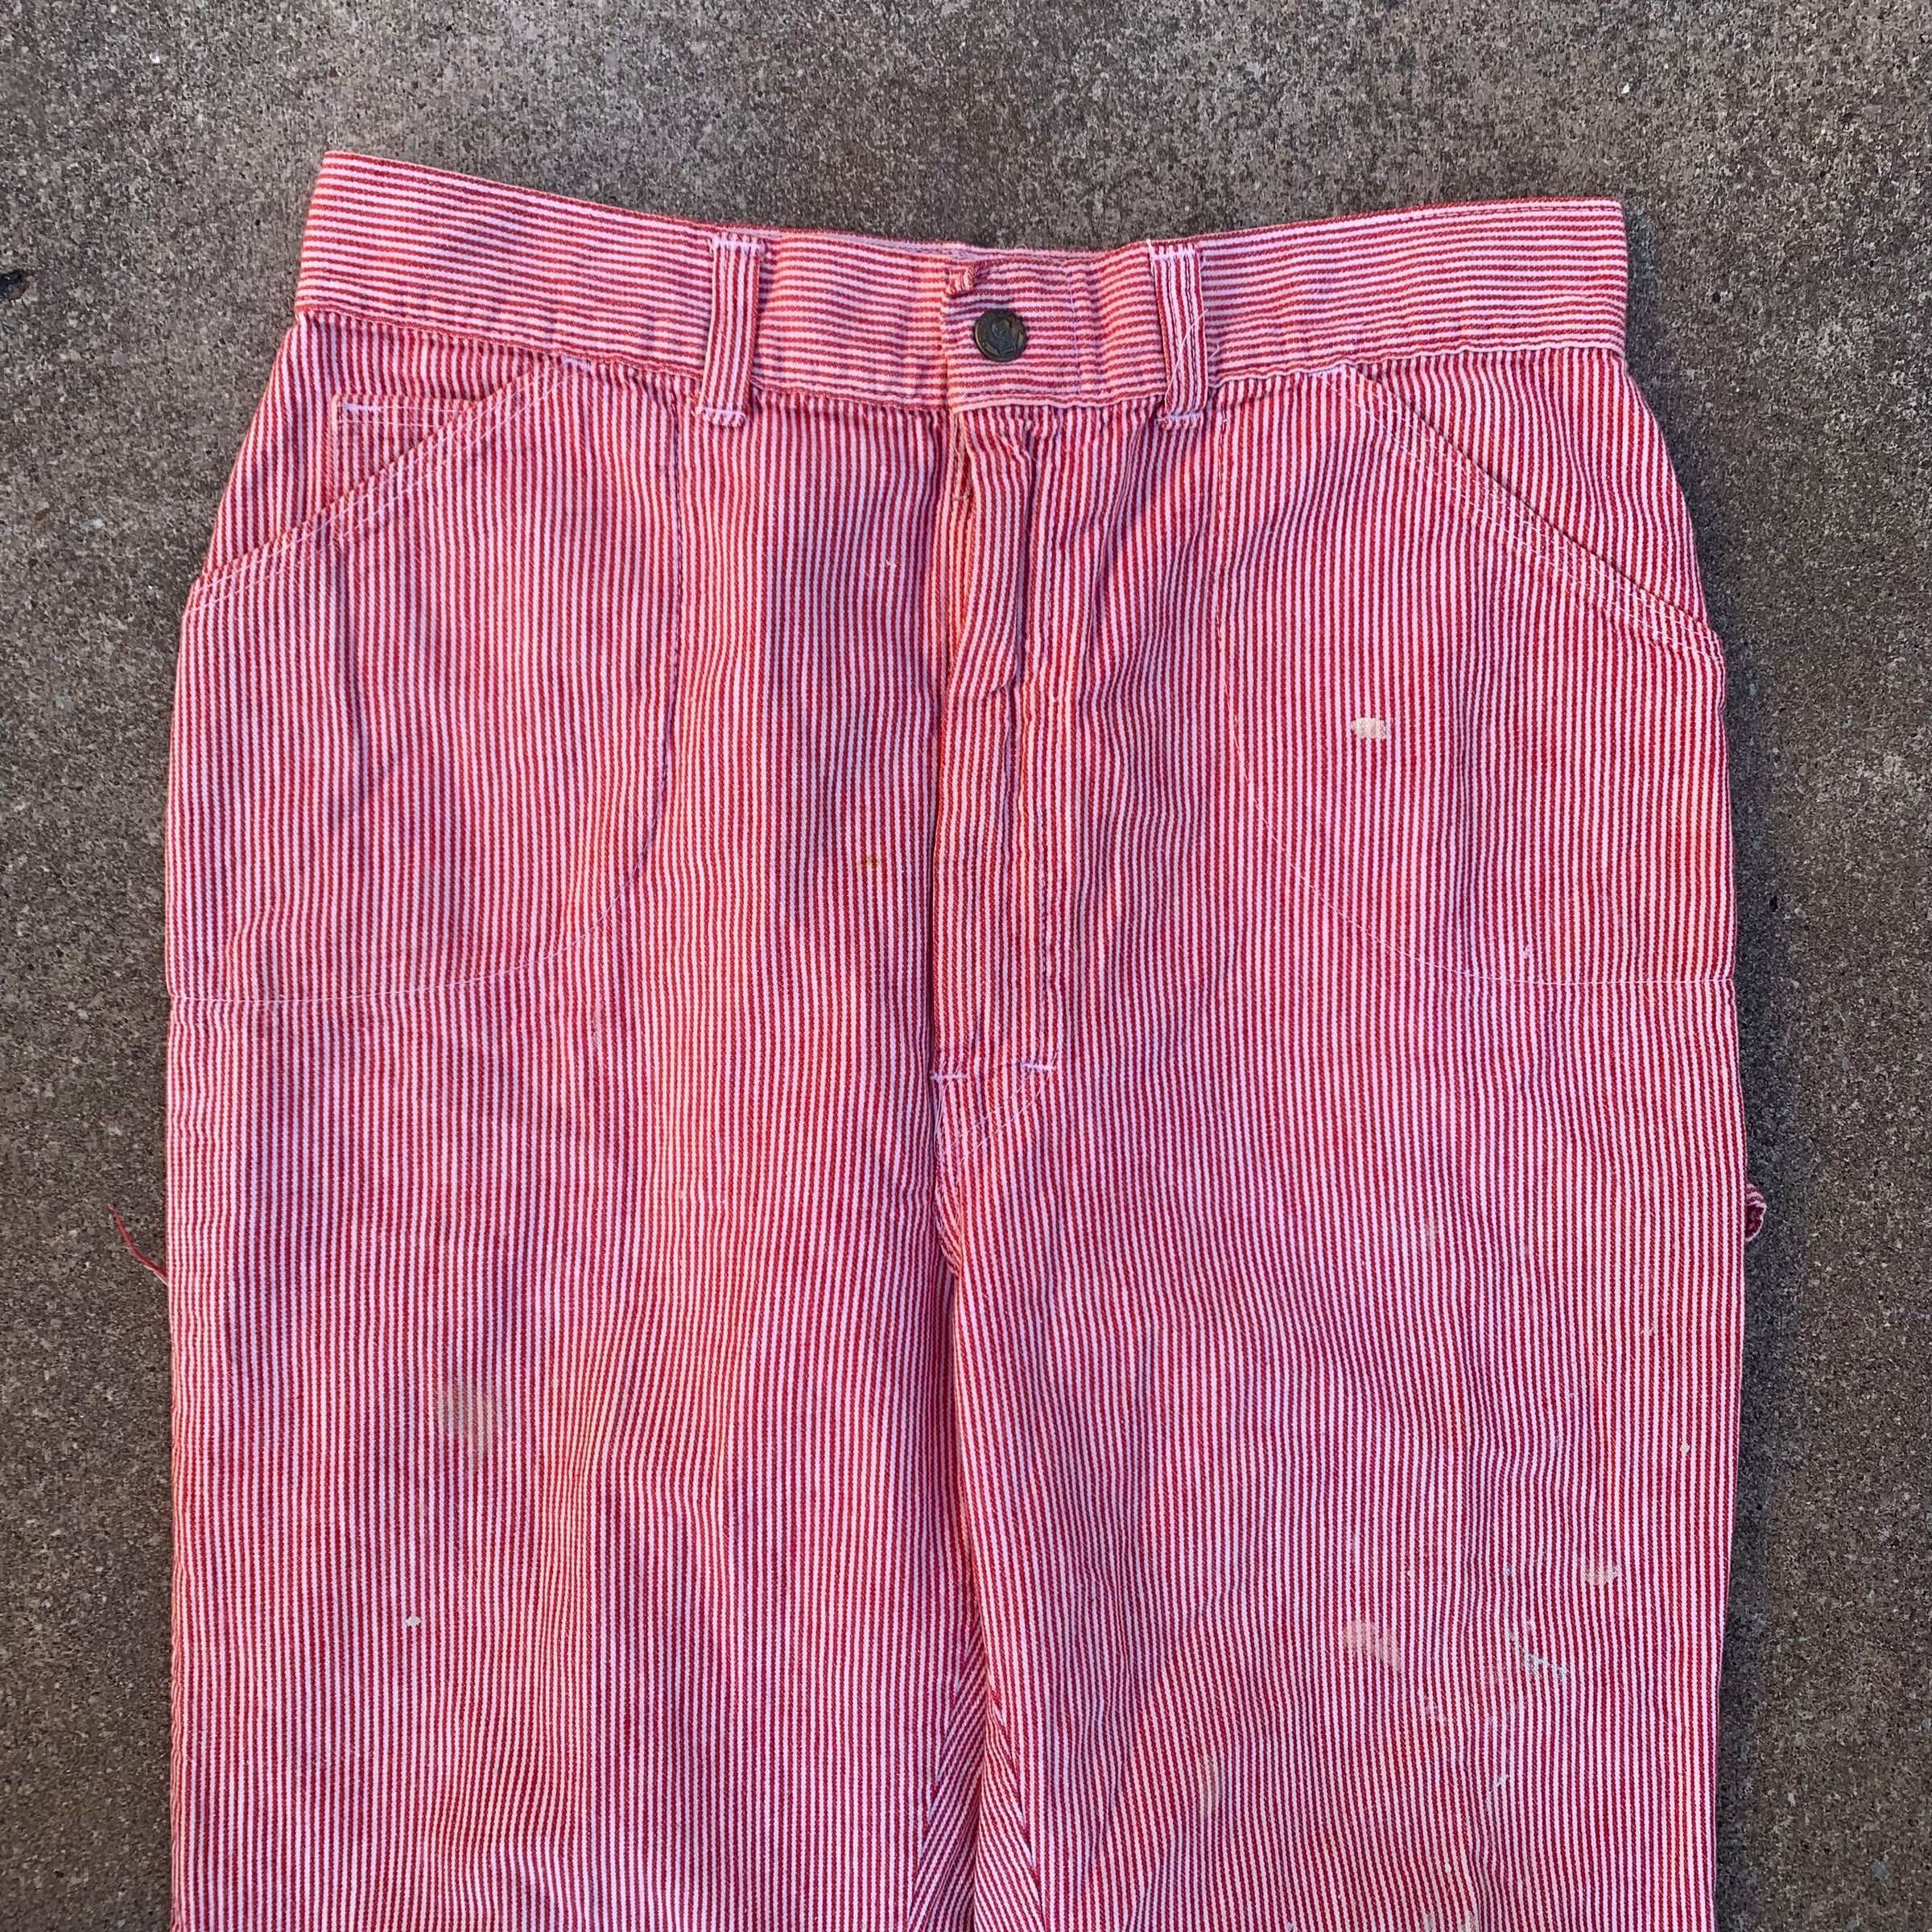 1960’s Rumble Seats Red Hickory Stripe Carpenter Pants 30” x 29”